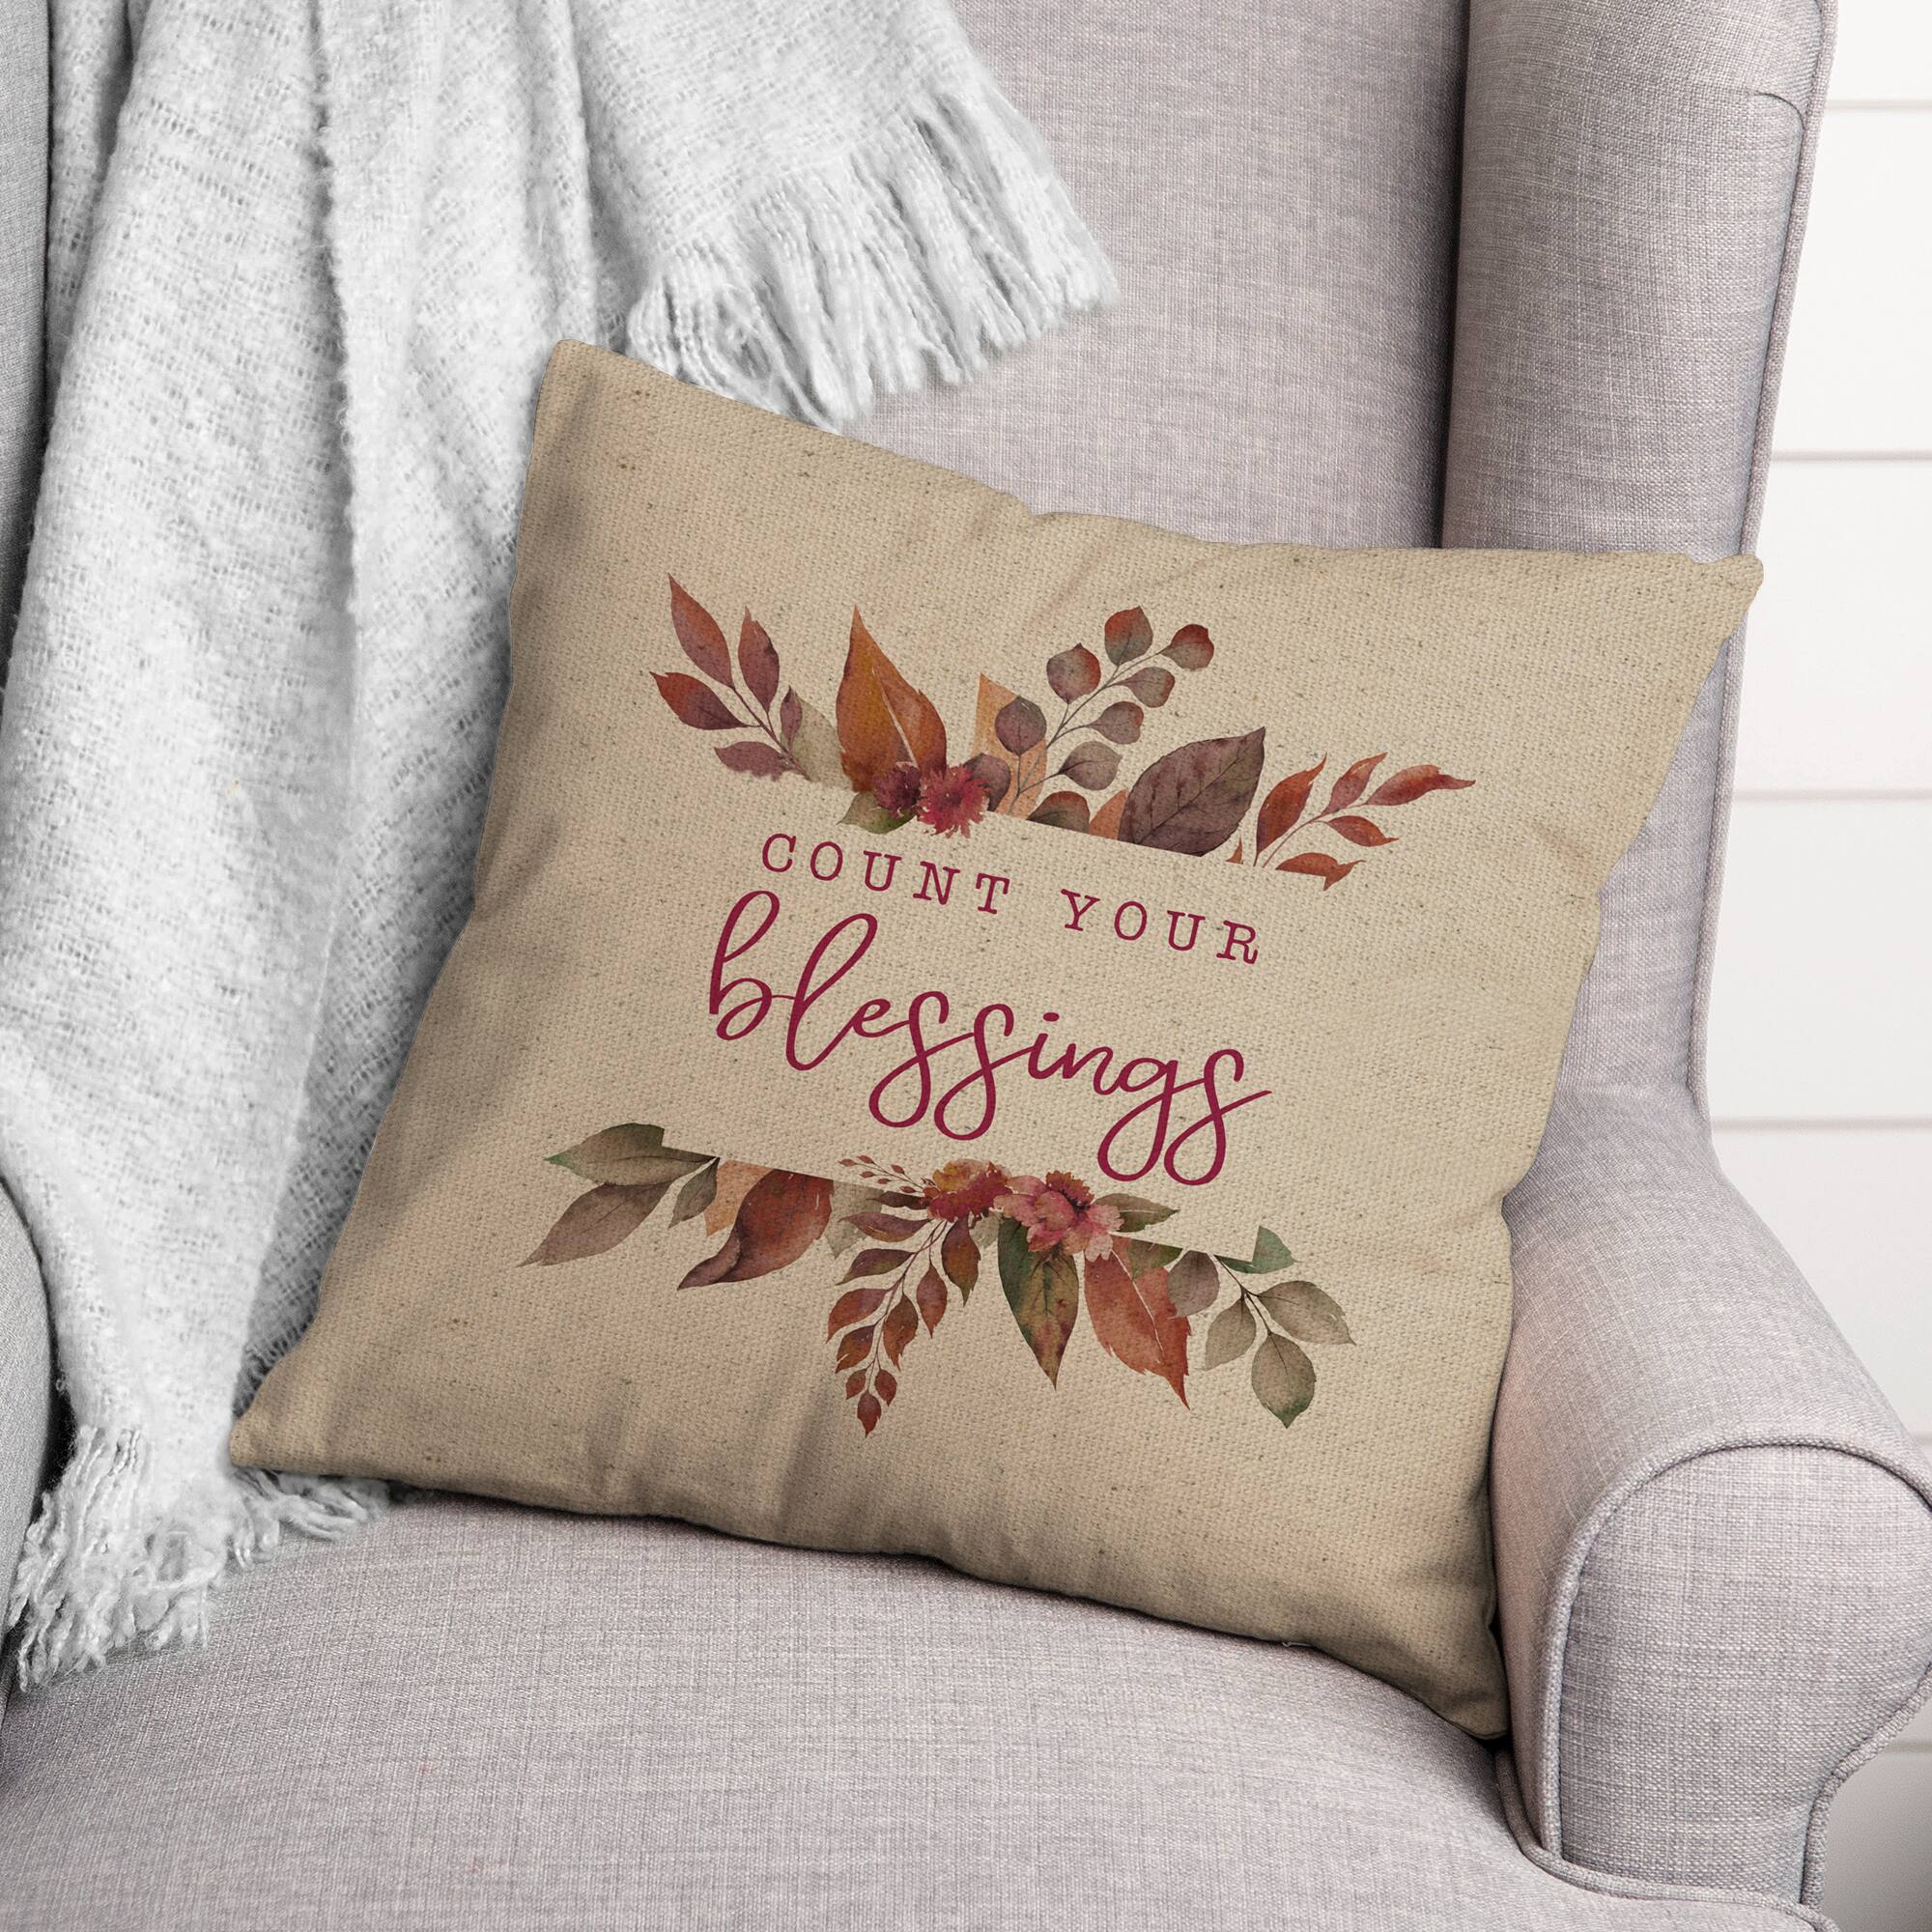 Count Your Blessings Throw Pillow